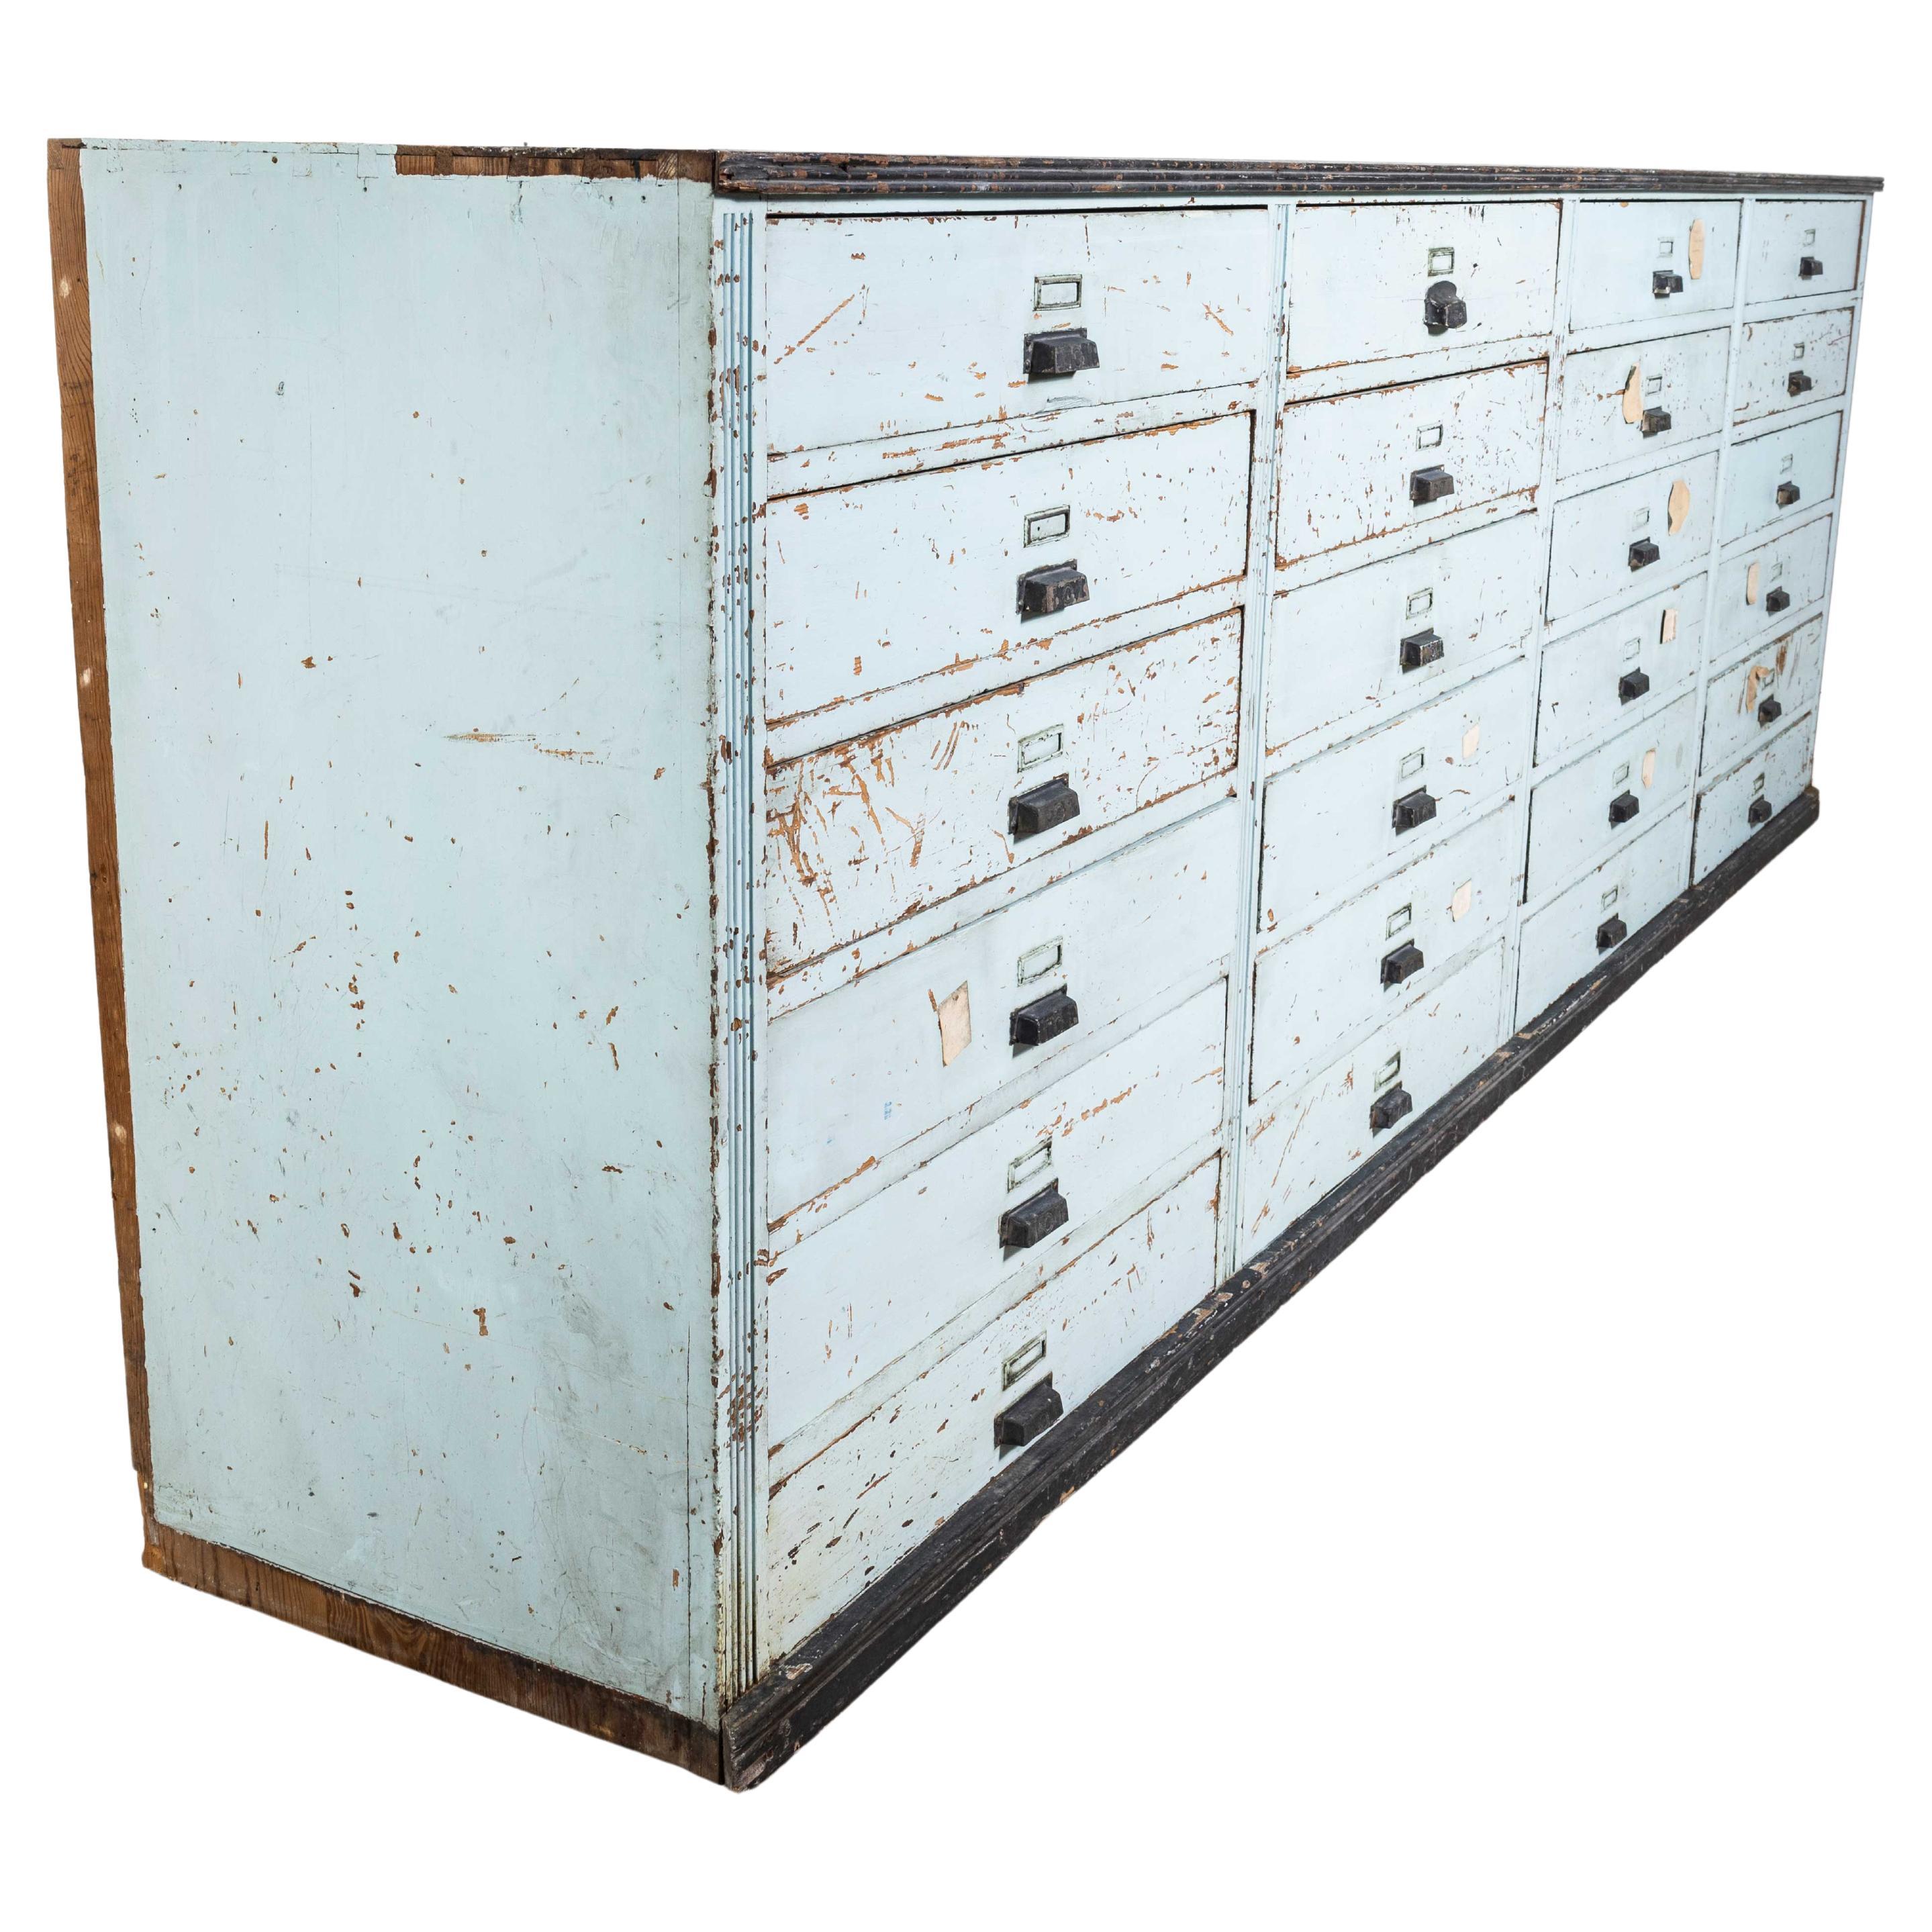 1940's Large Bank Of French Workshop Drawers - Twenty Four Drawers